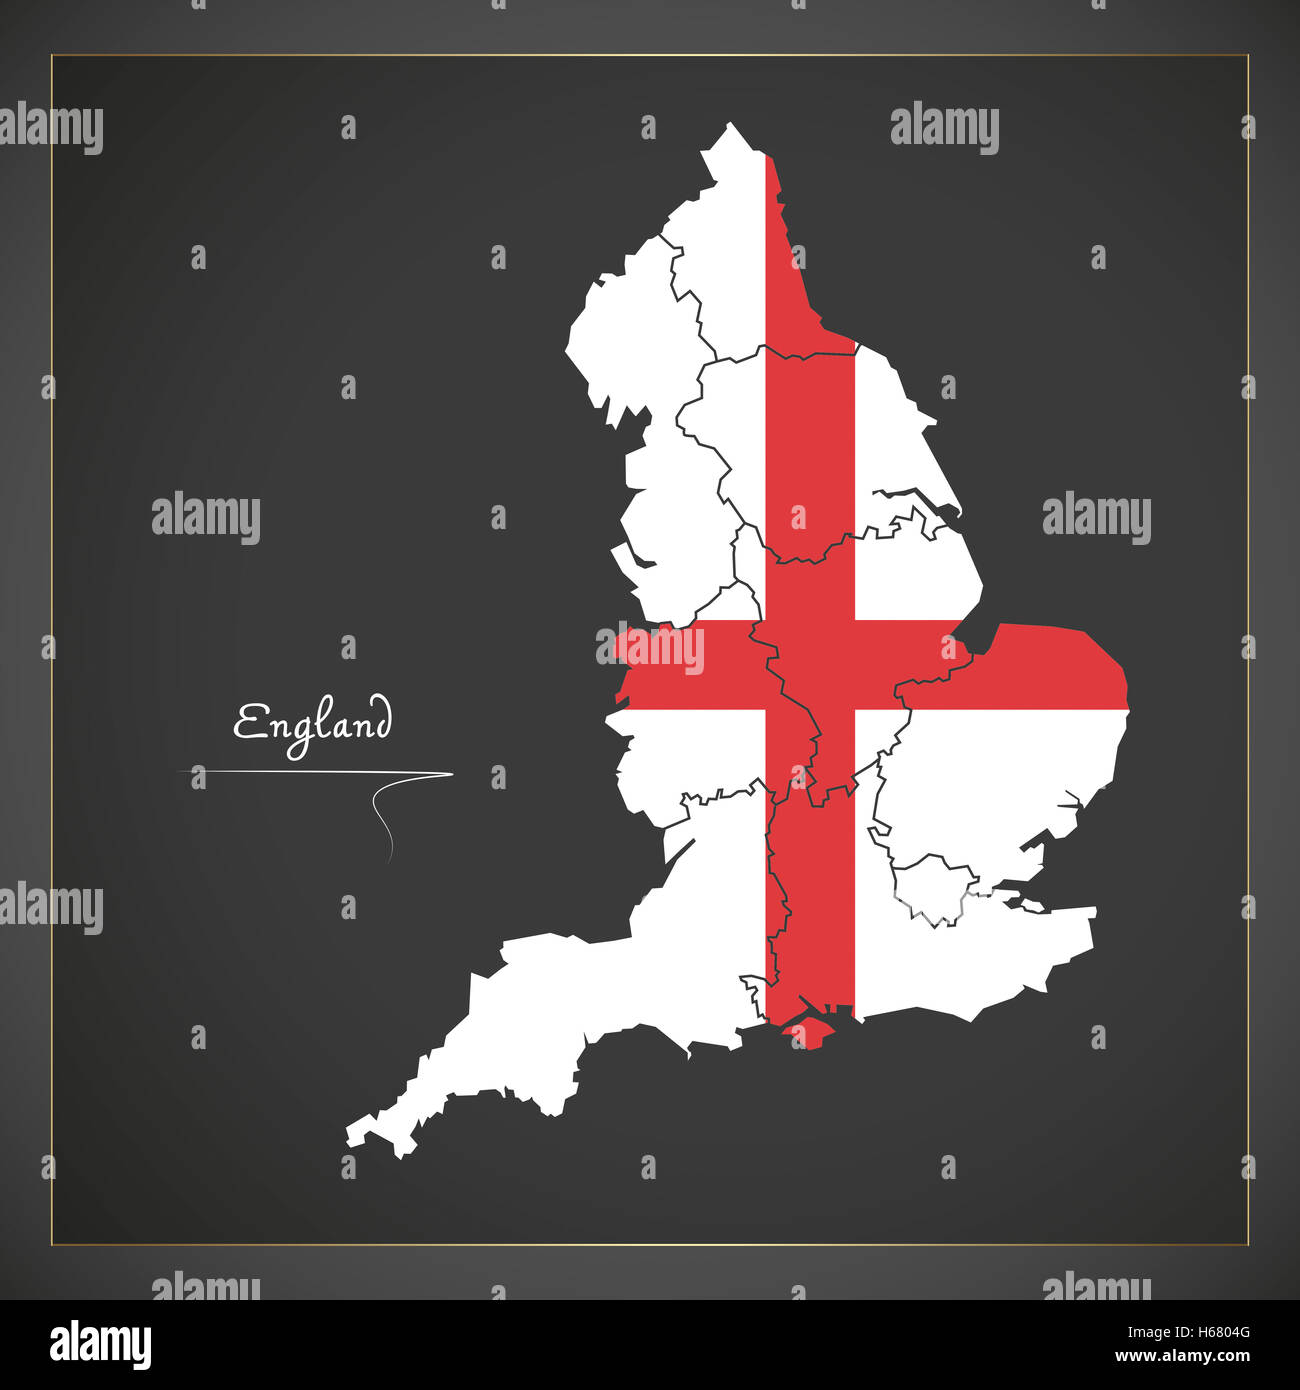 England map artwork with national colors illustration Stock Photo